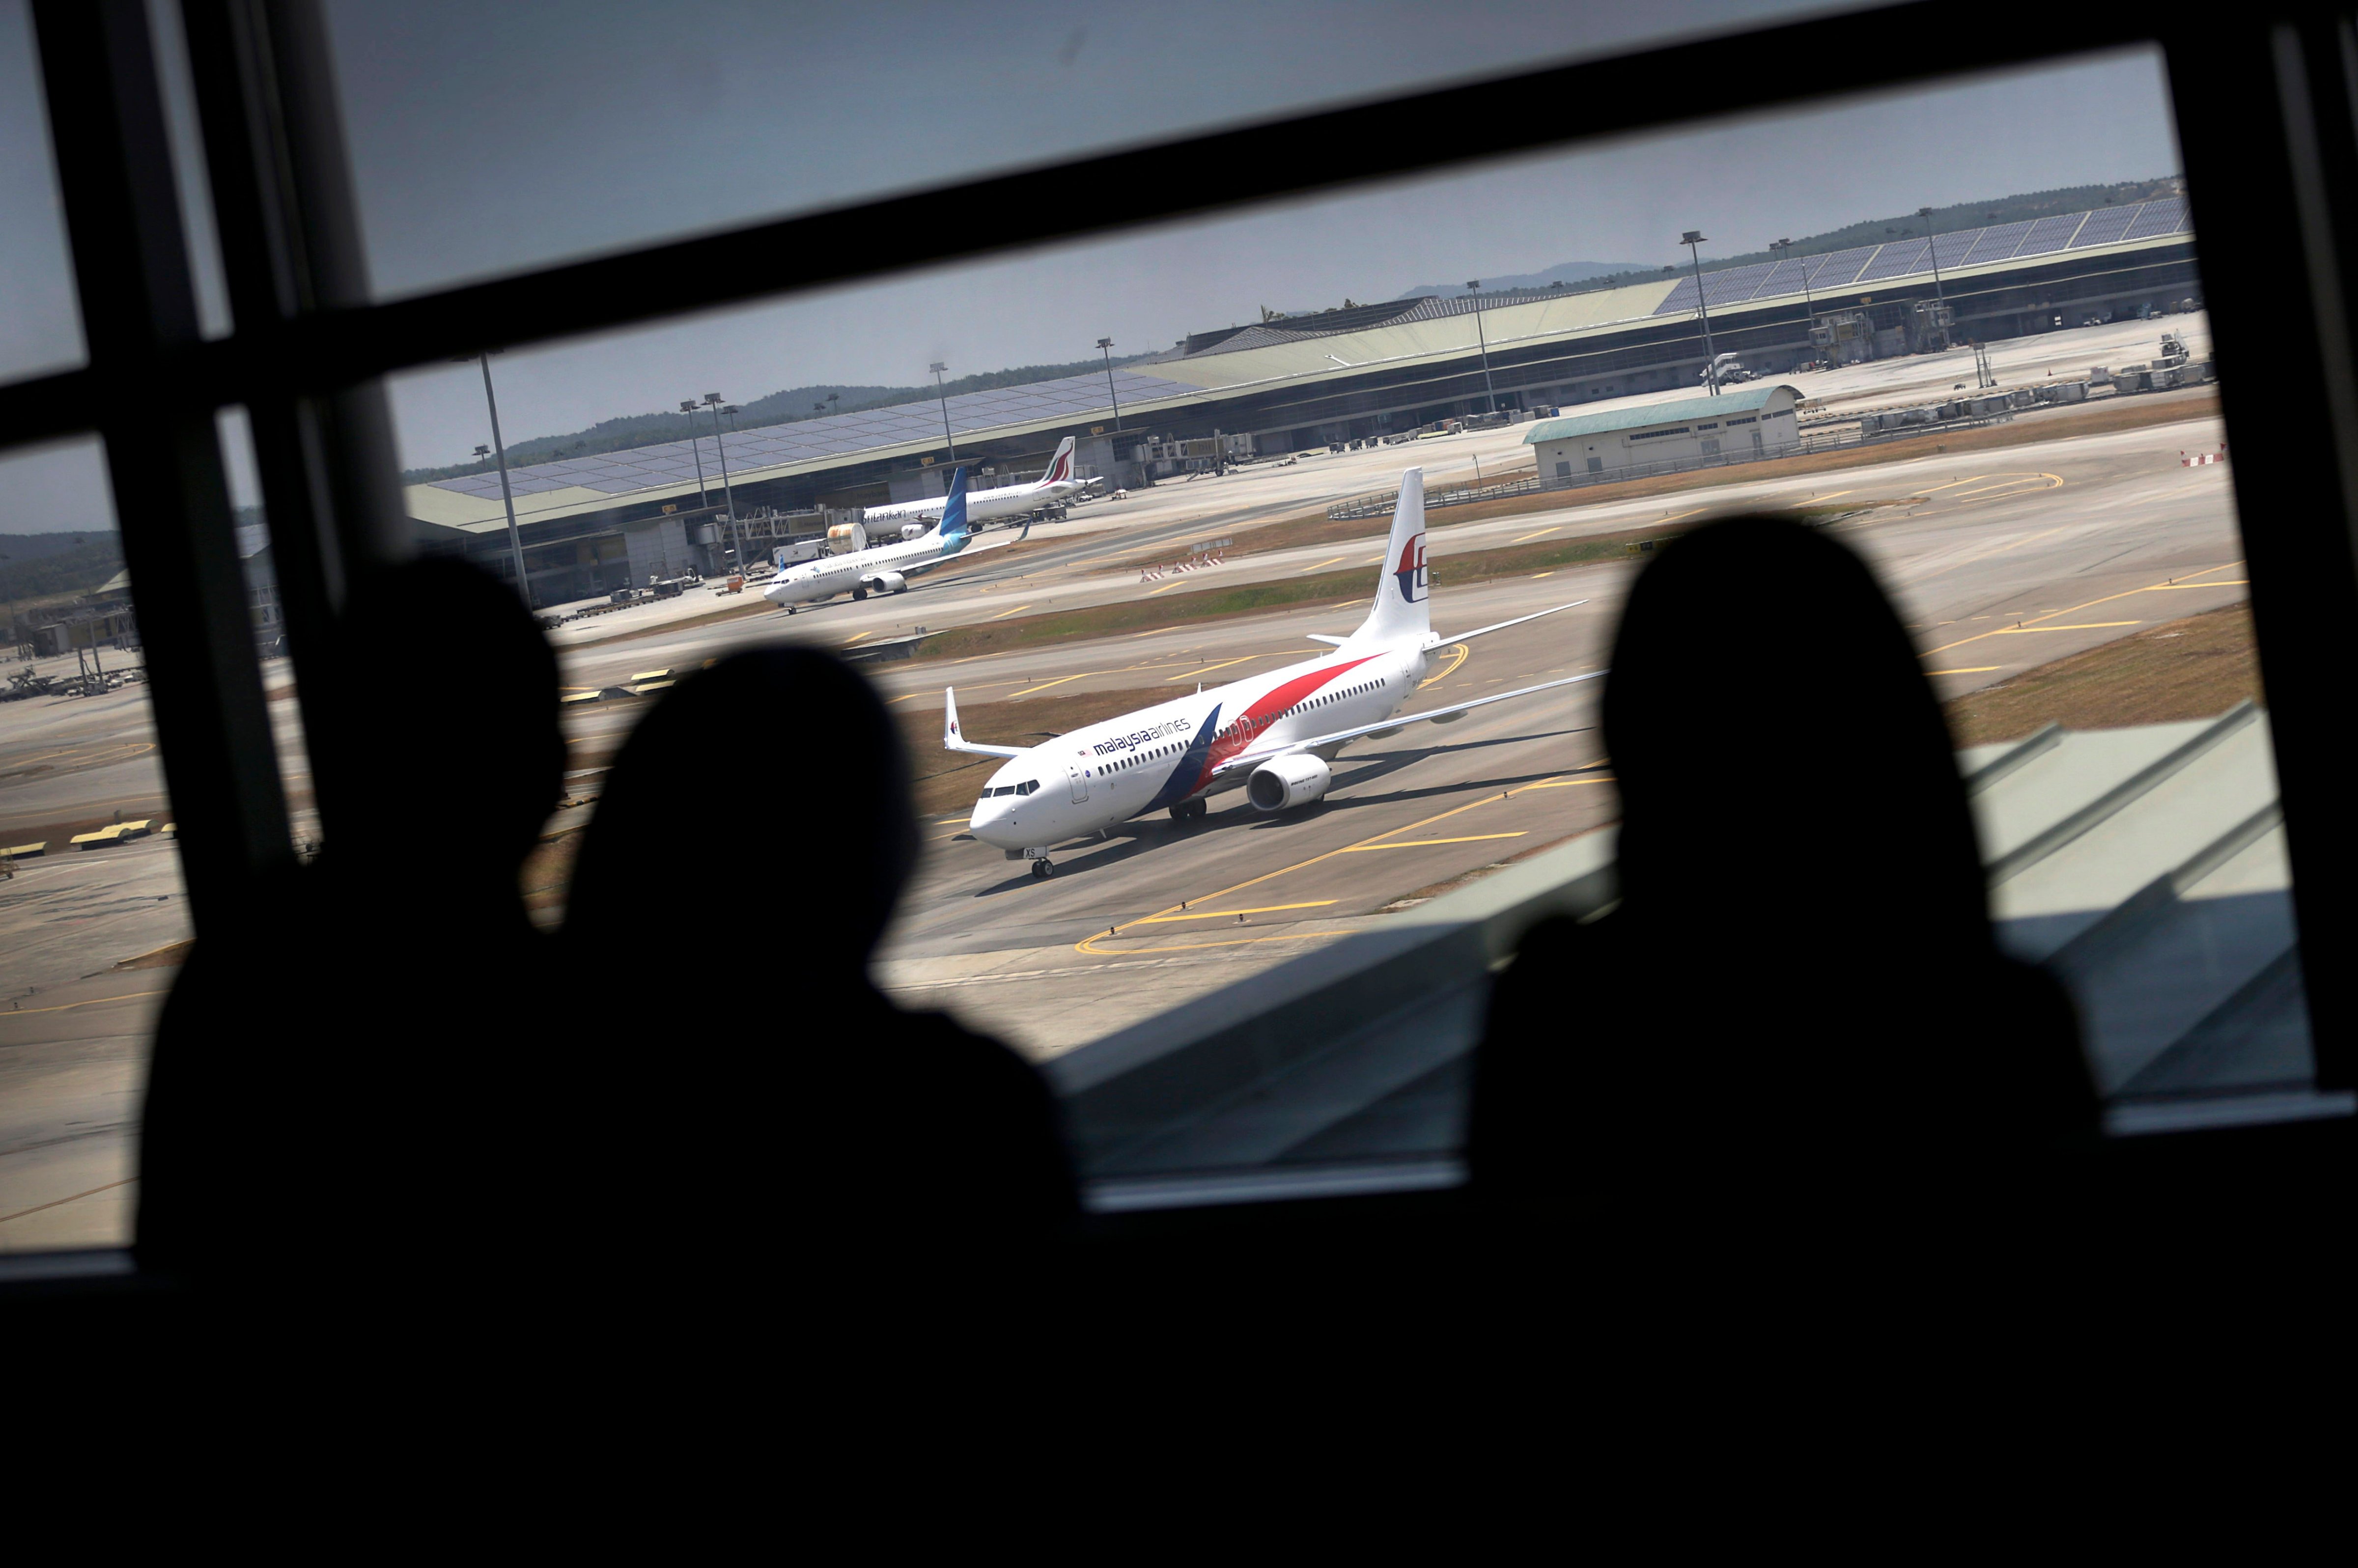 Women are silhouetted as they watch a Malaysia Airlines jet taxi on the tarmac at the Kuala Lumpur International Airport.